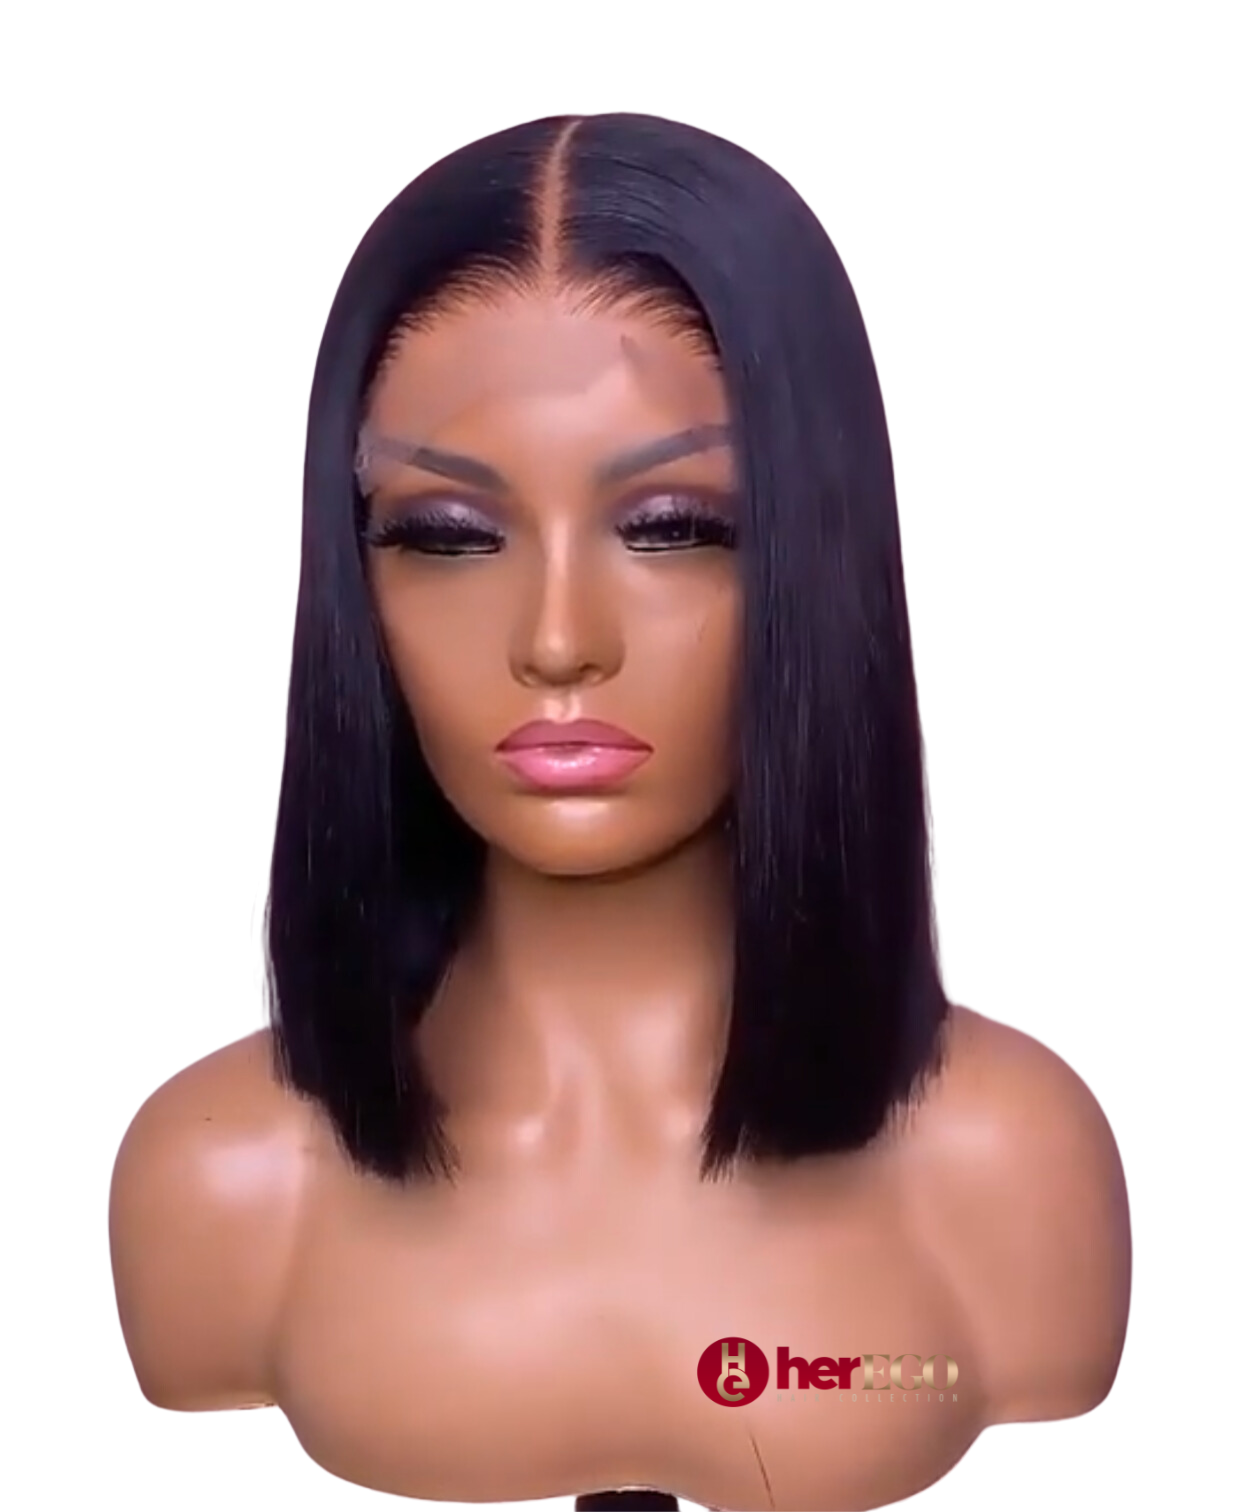 Glueless Straight Closure Bob Wig - Her Ego Hair Collection